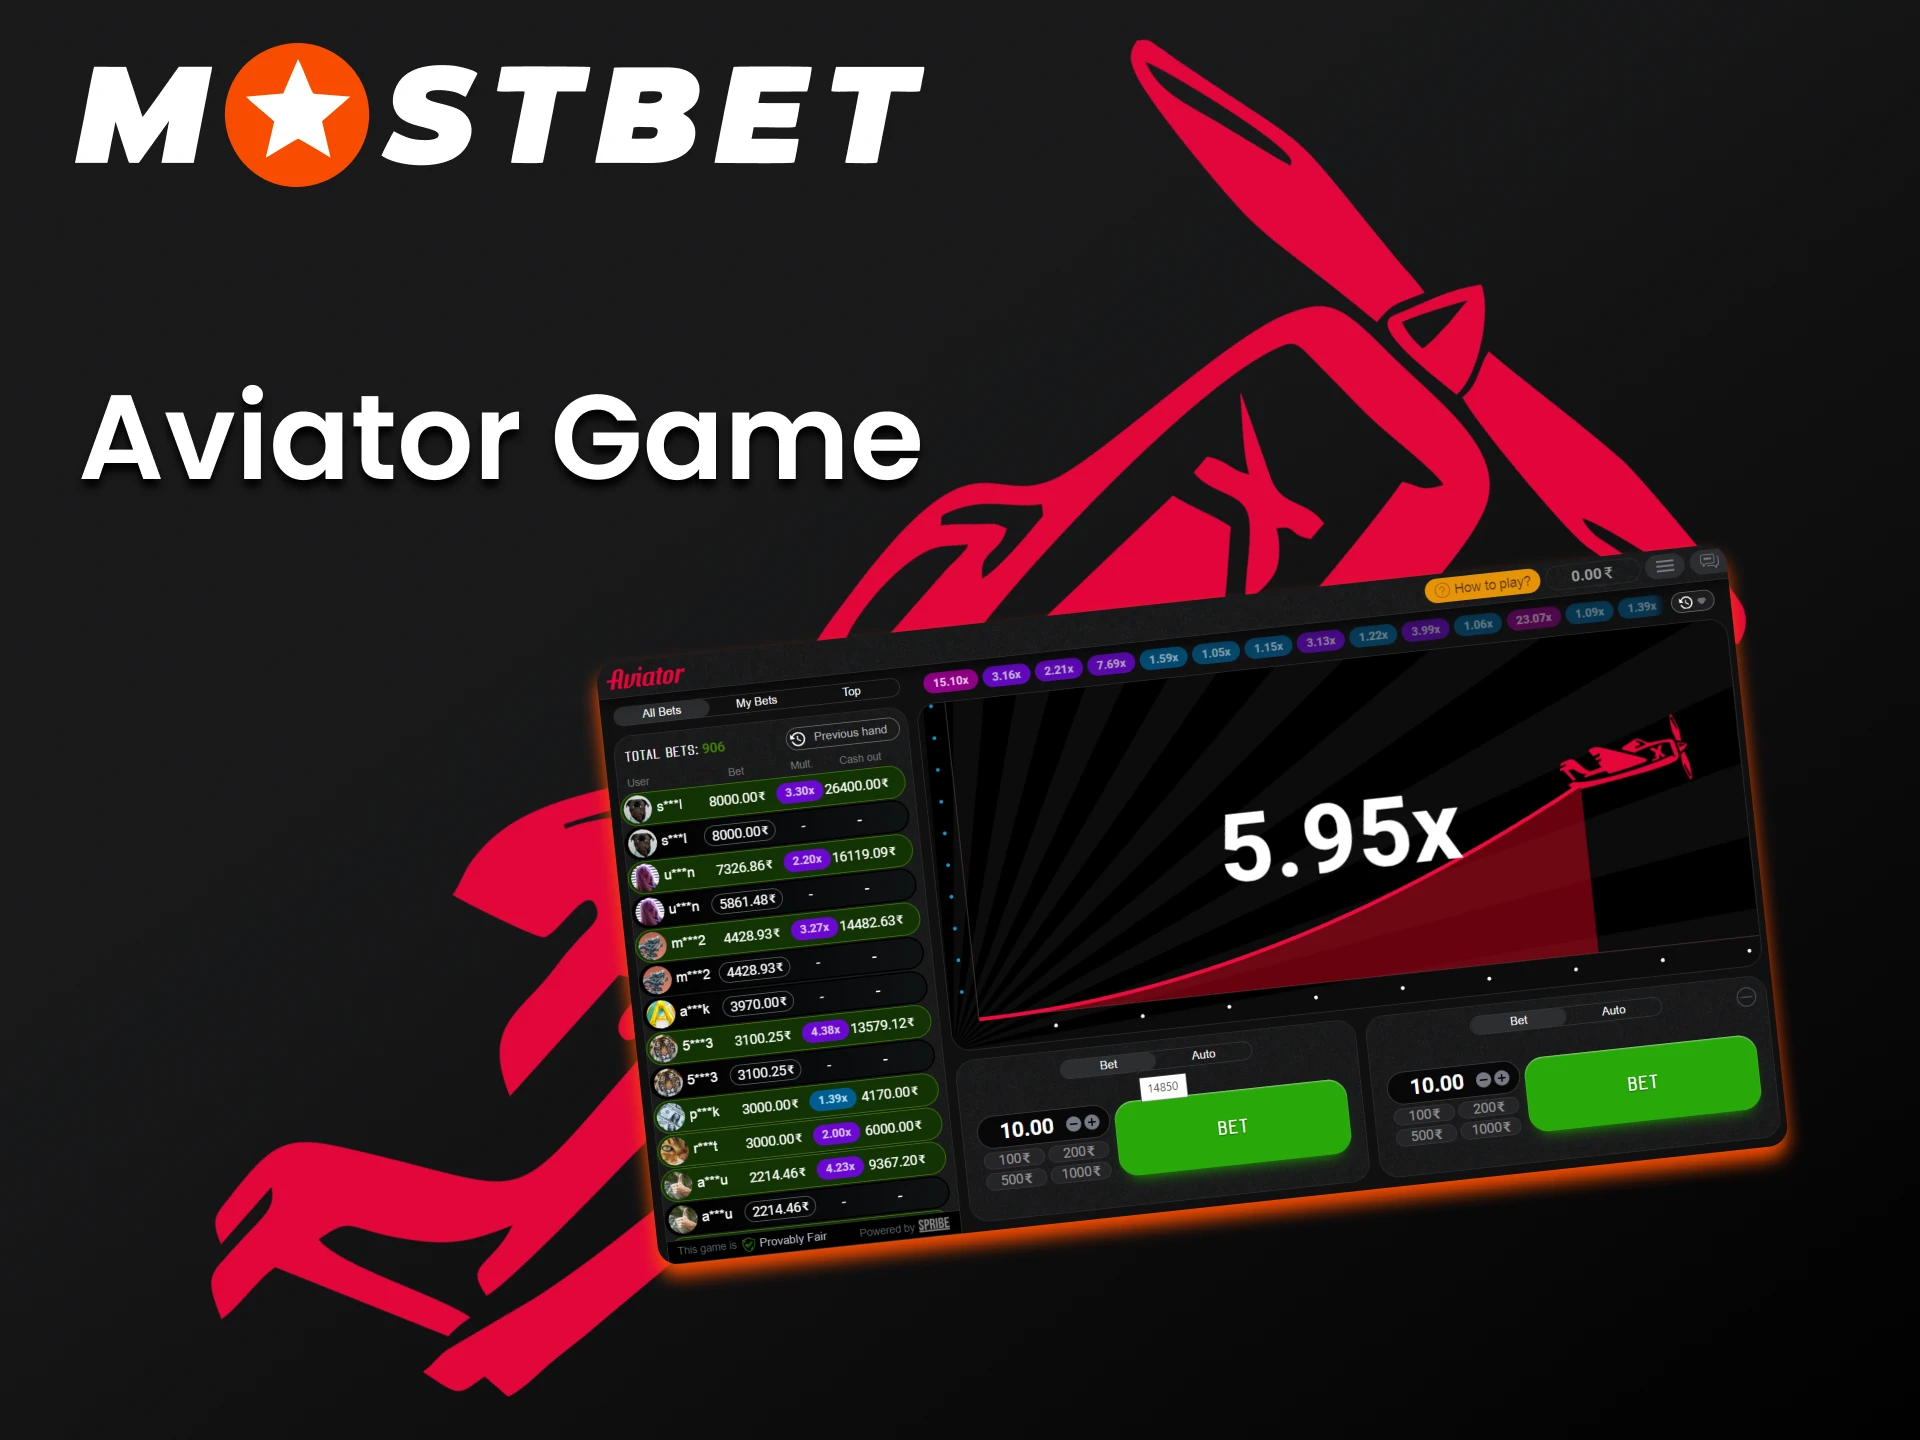 You can play Aviator on the Mostbet platform.